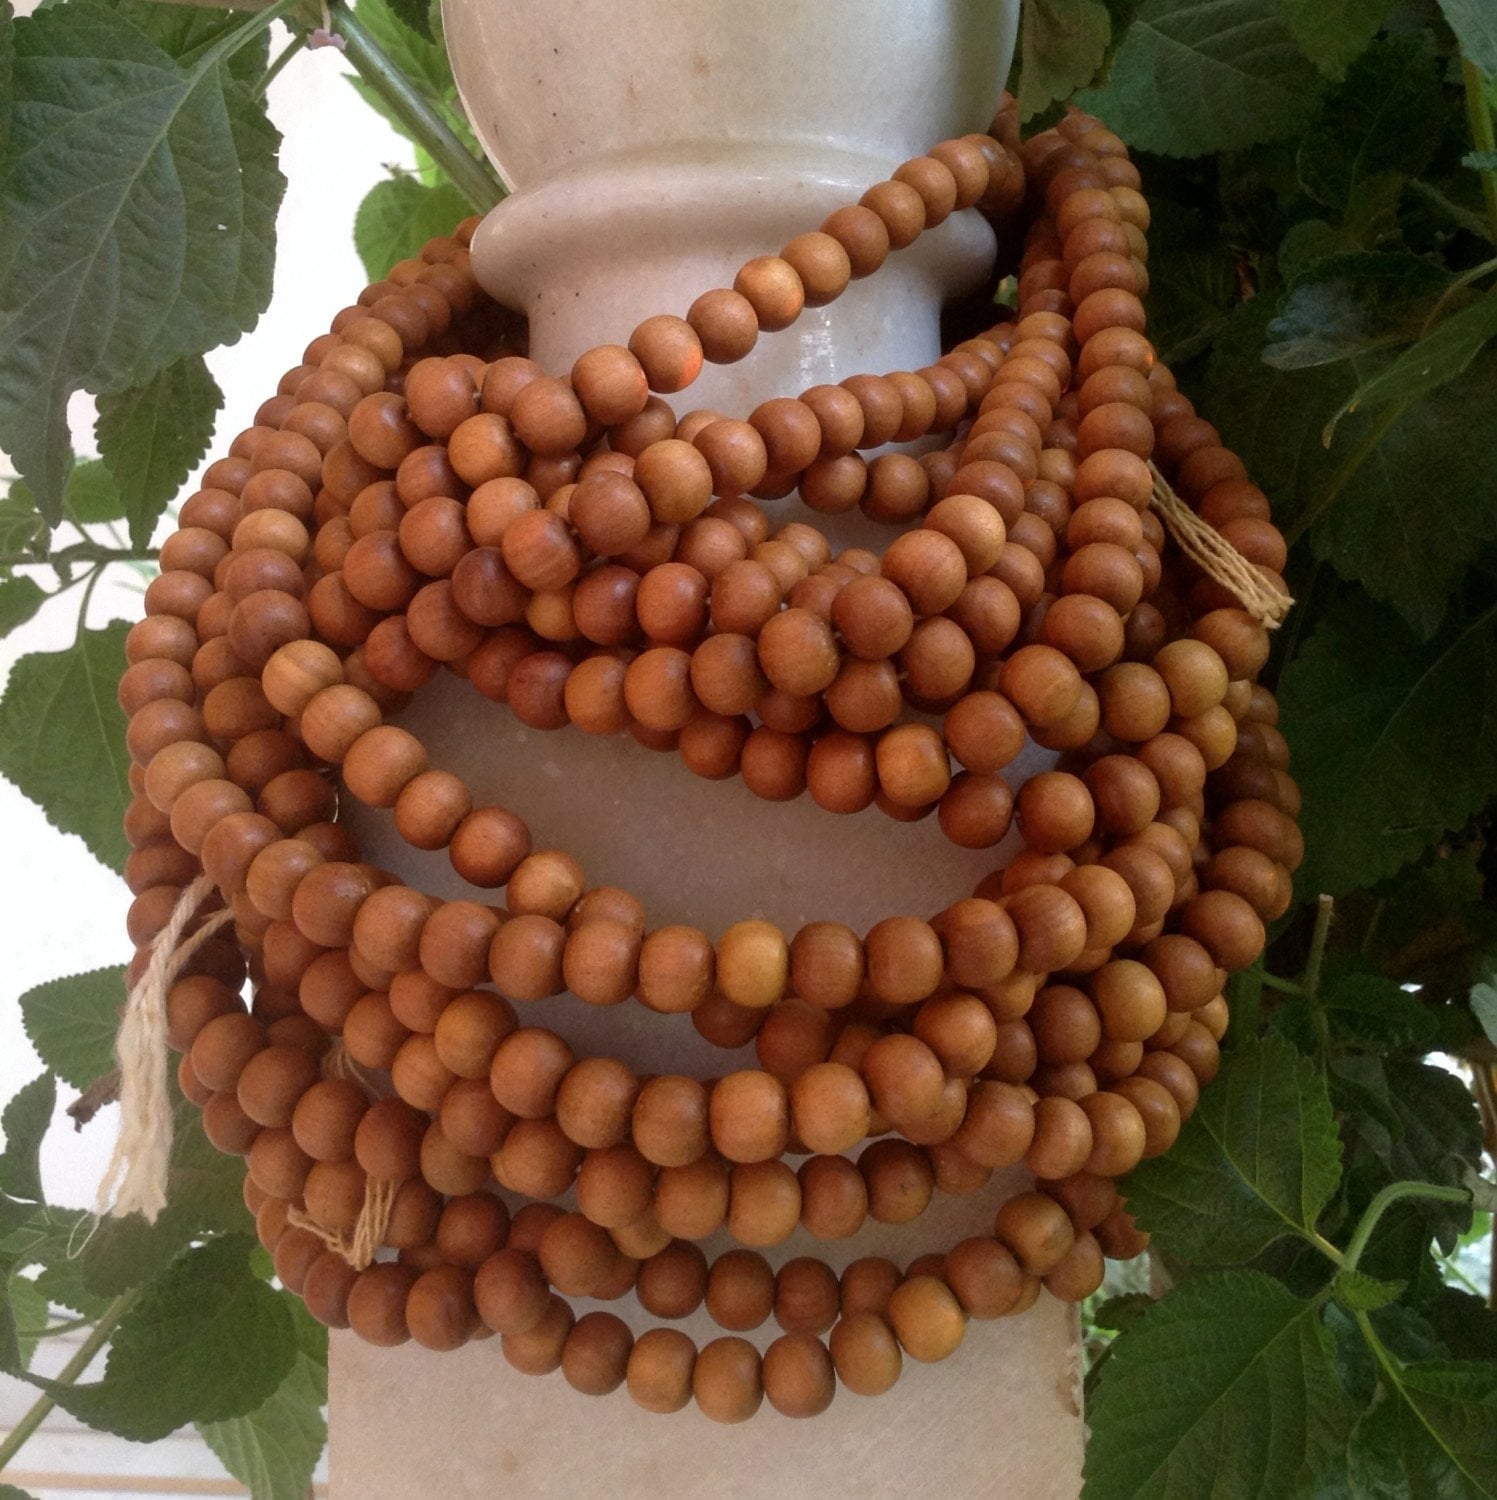 The Truth About Sandalwood Beads Your Supplier Never Told You - IndiOdyssey